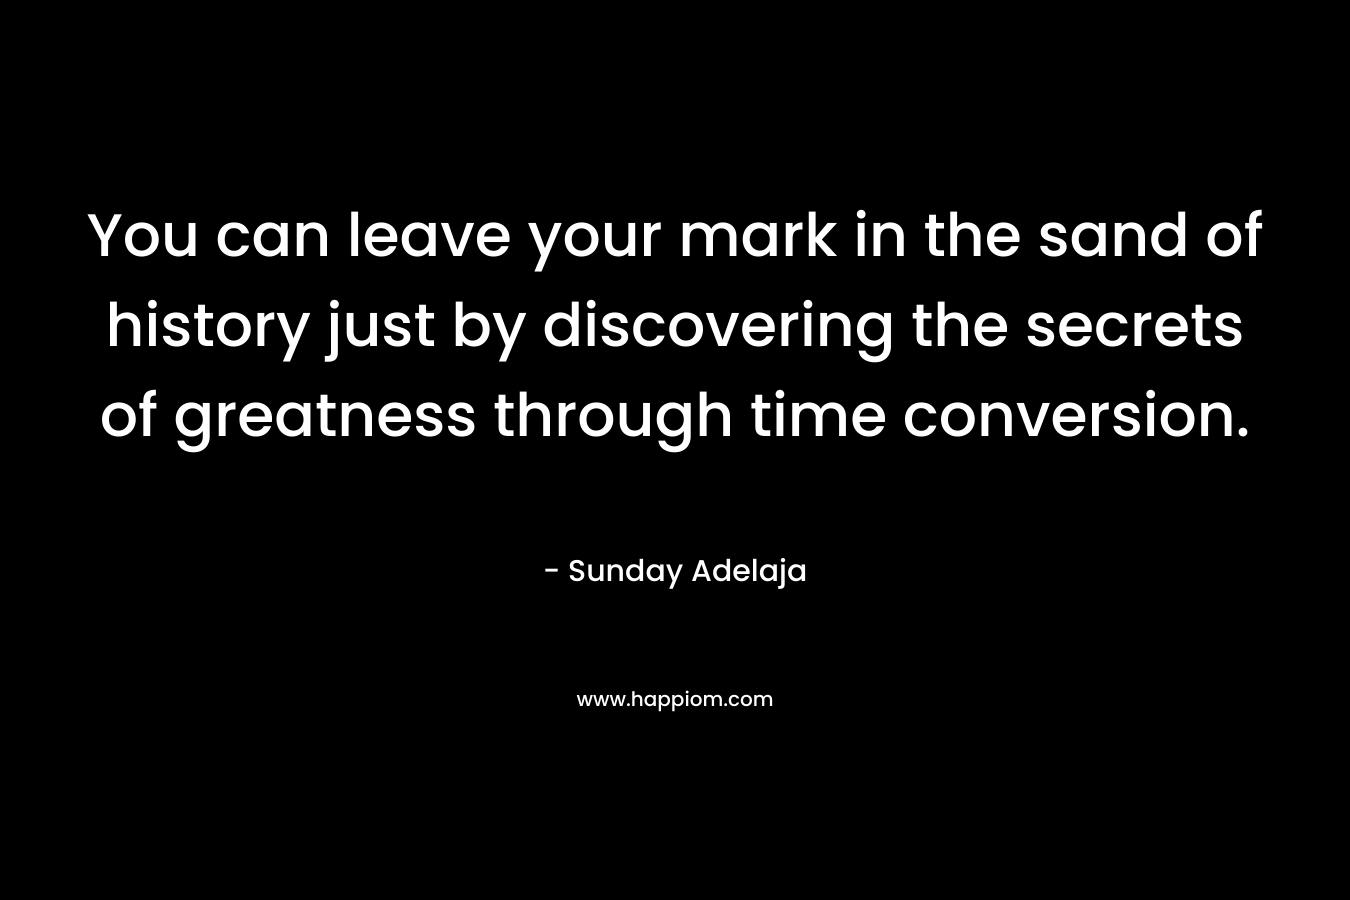 You can leave your mark in the sand of history just by discovering the secrets of greatness through time conversion.